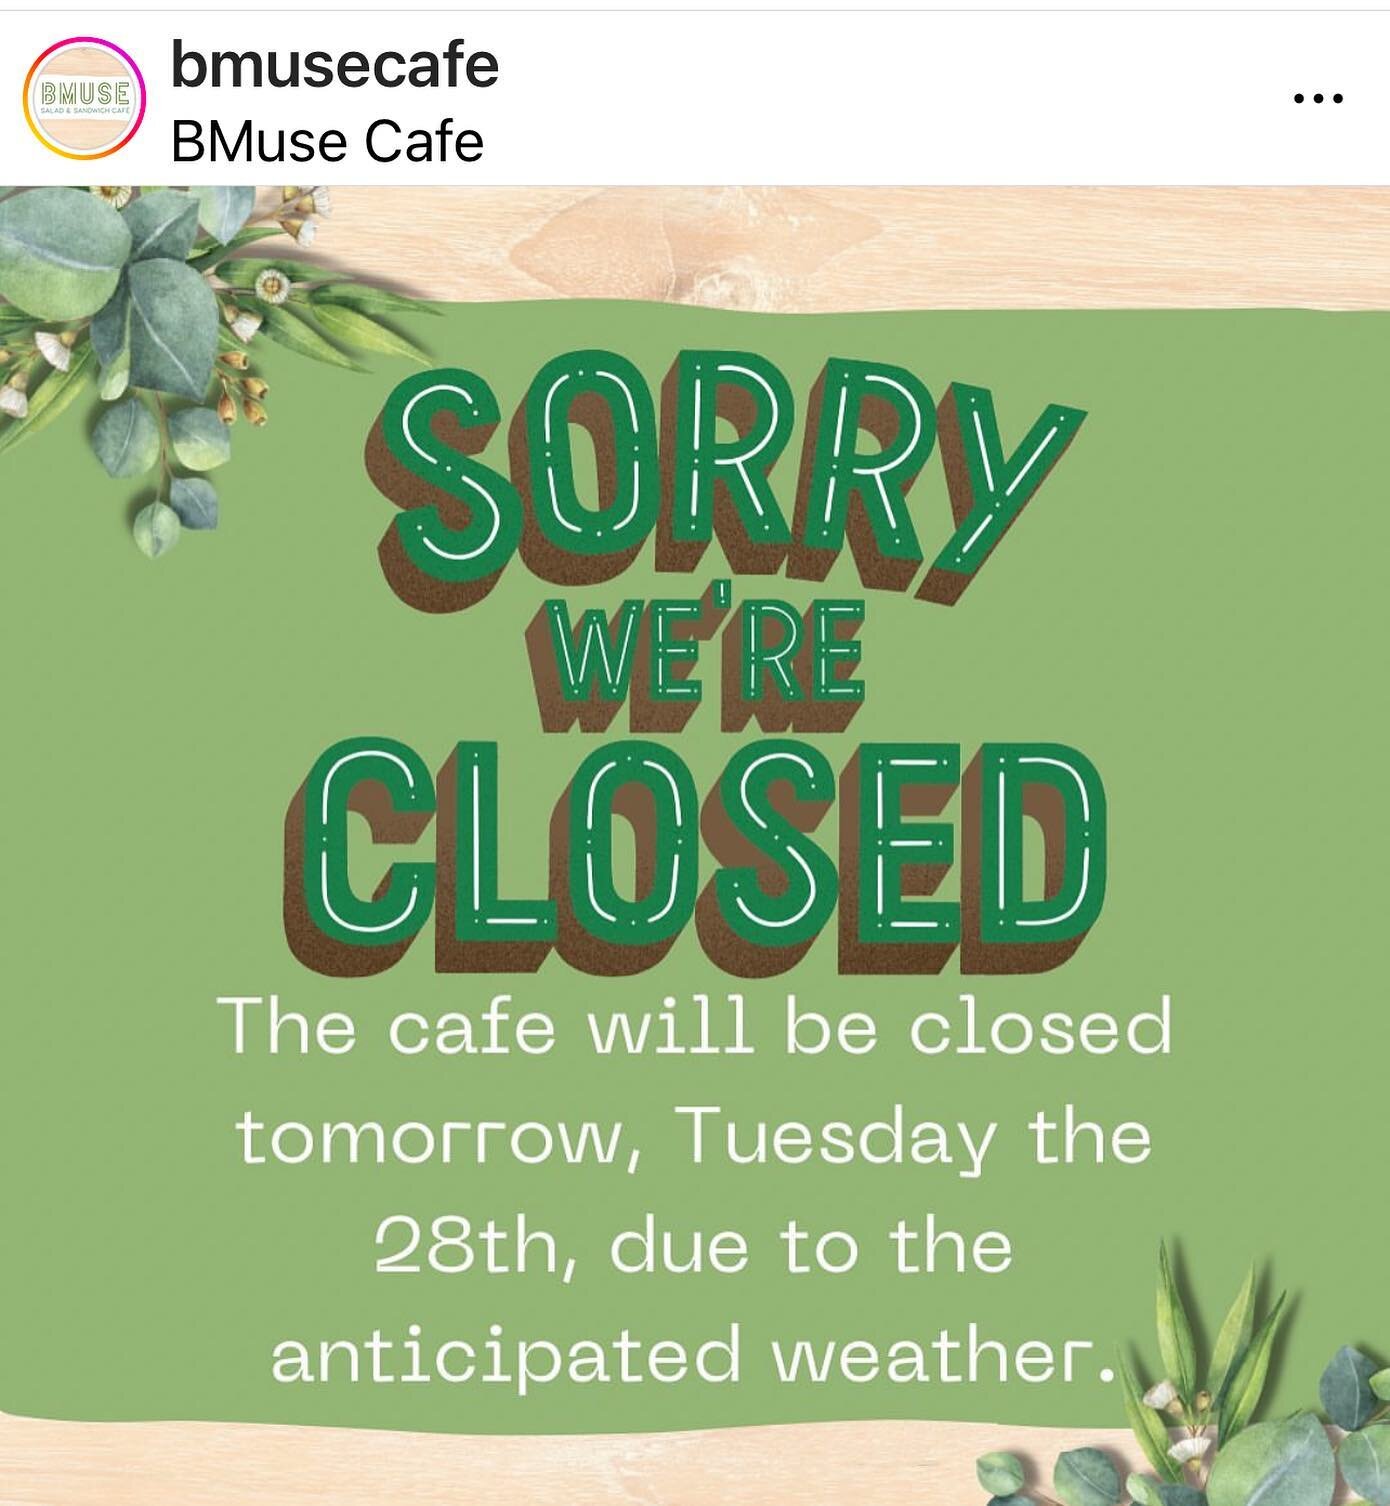 Our Cafe will be closed tomorrow due to the weather. We will still be safely operational for catering. See you all back in the cafe on Wednesday. Thank you! 
.
.
#cheflife  #foodie #wedding #lefebvreluxe #bourassacatering  #instafood #local #beautifu